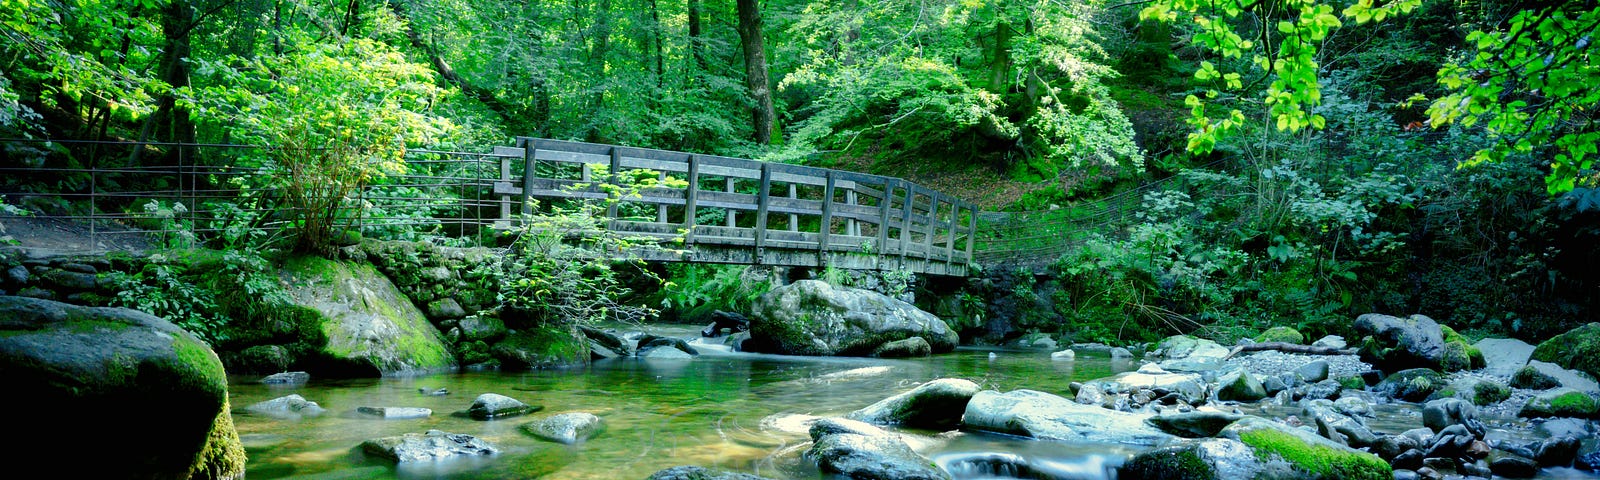 A bridge crossing over a brook in the woods.